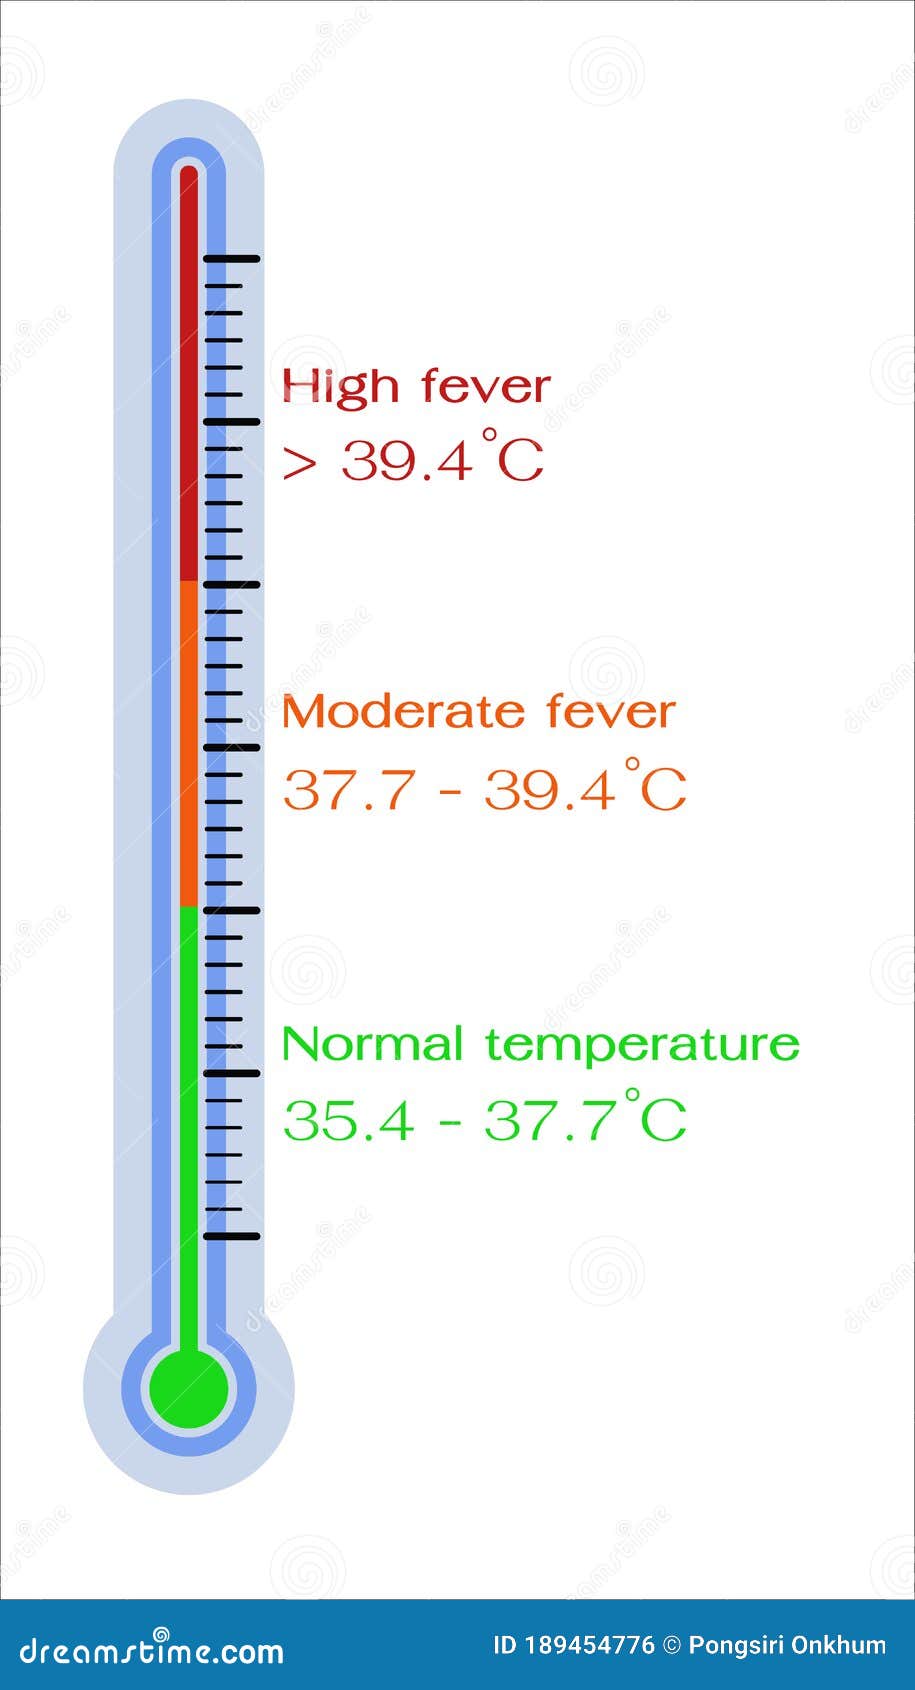 Free Vectors  thermometer showing high fever